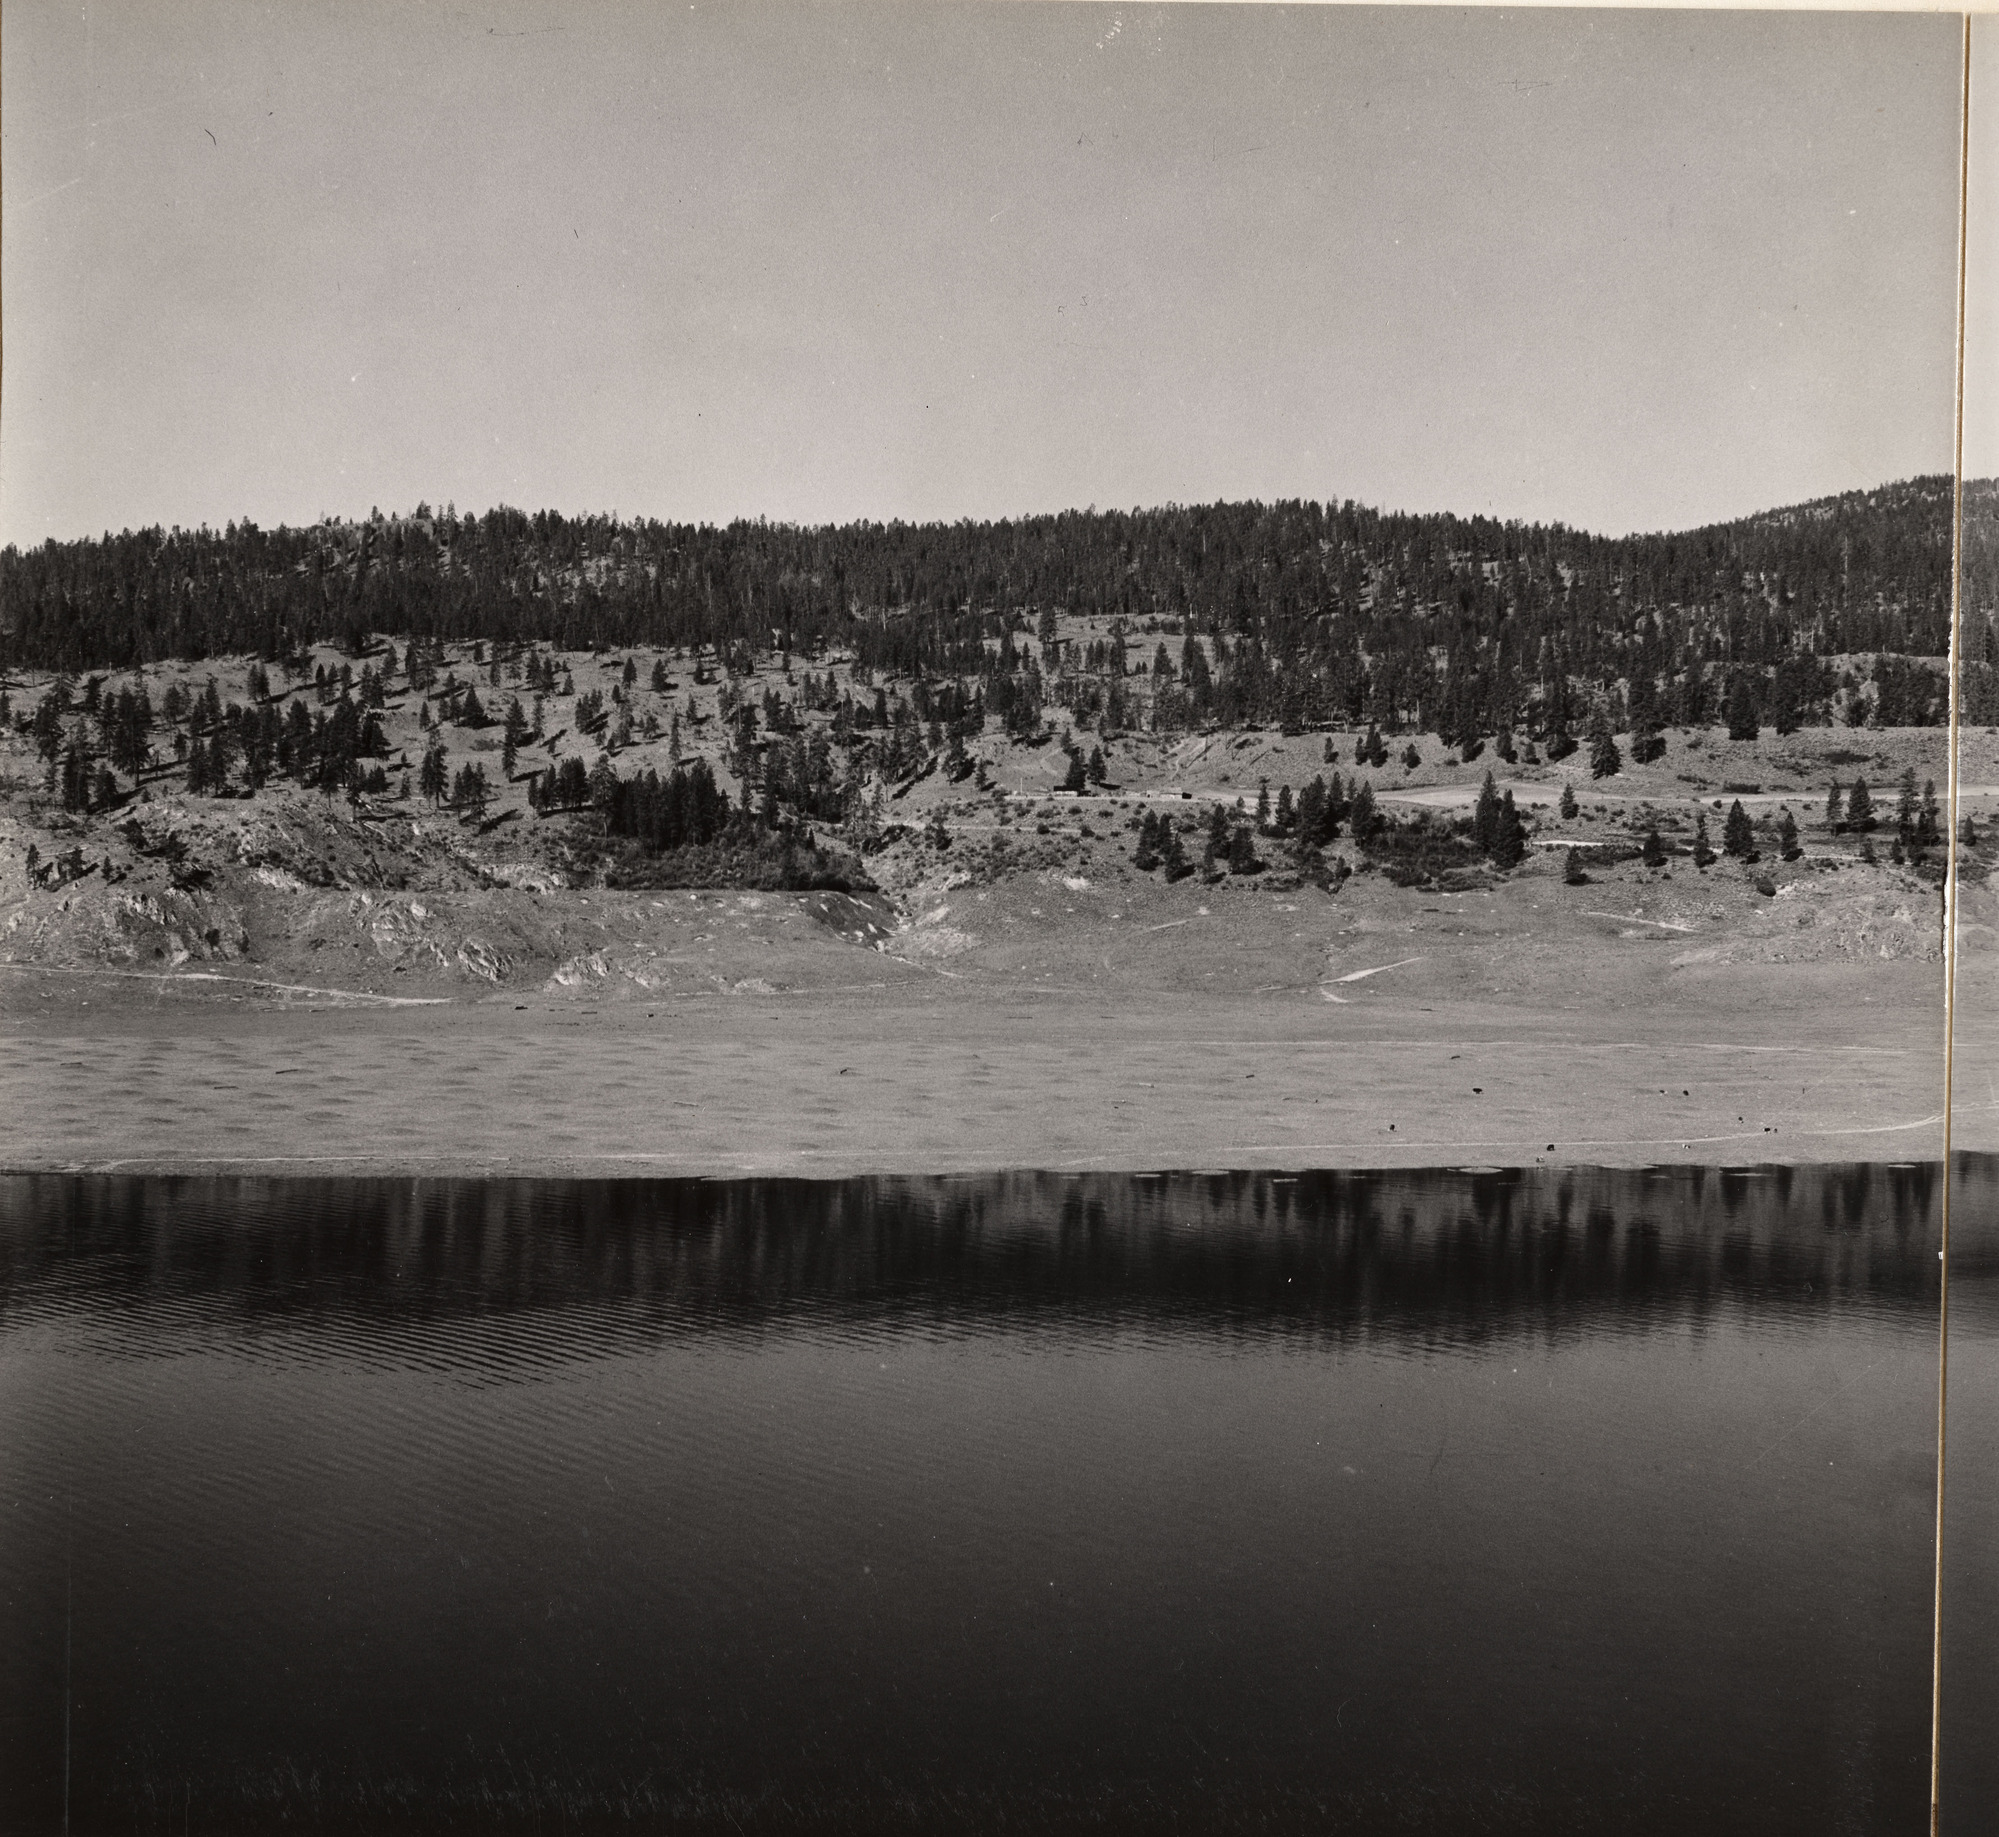 Black and white photograph of the hilly forested shore of a body of water.